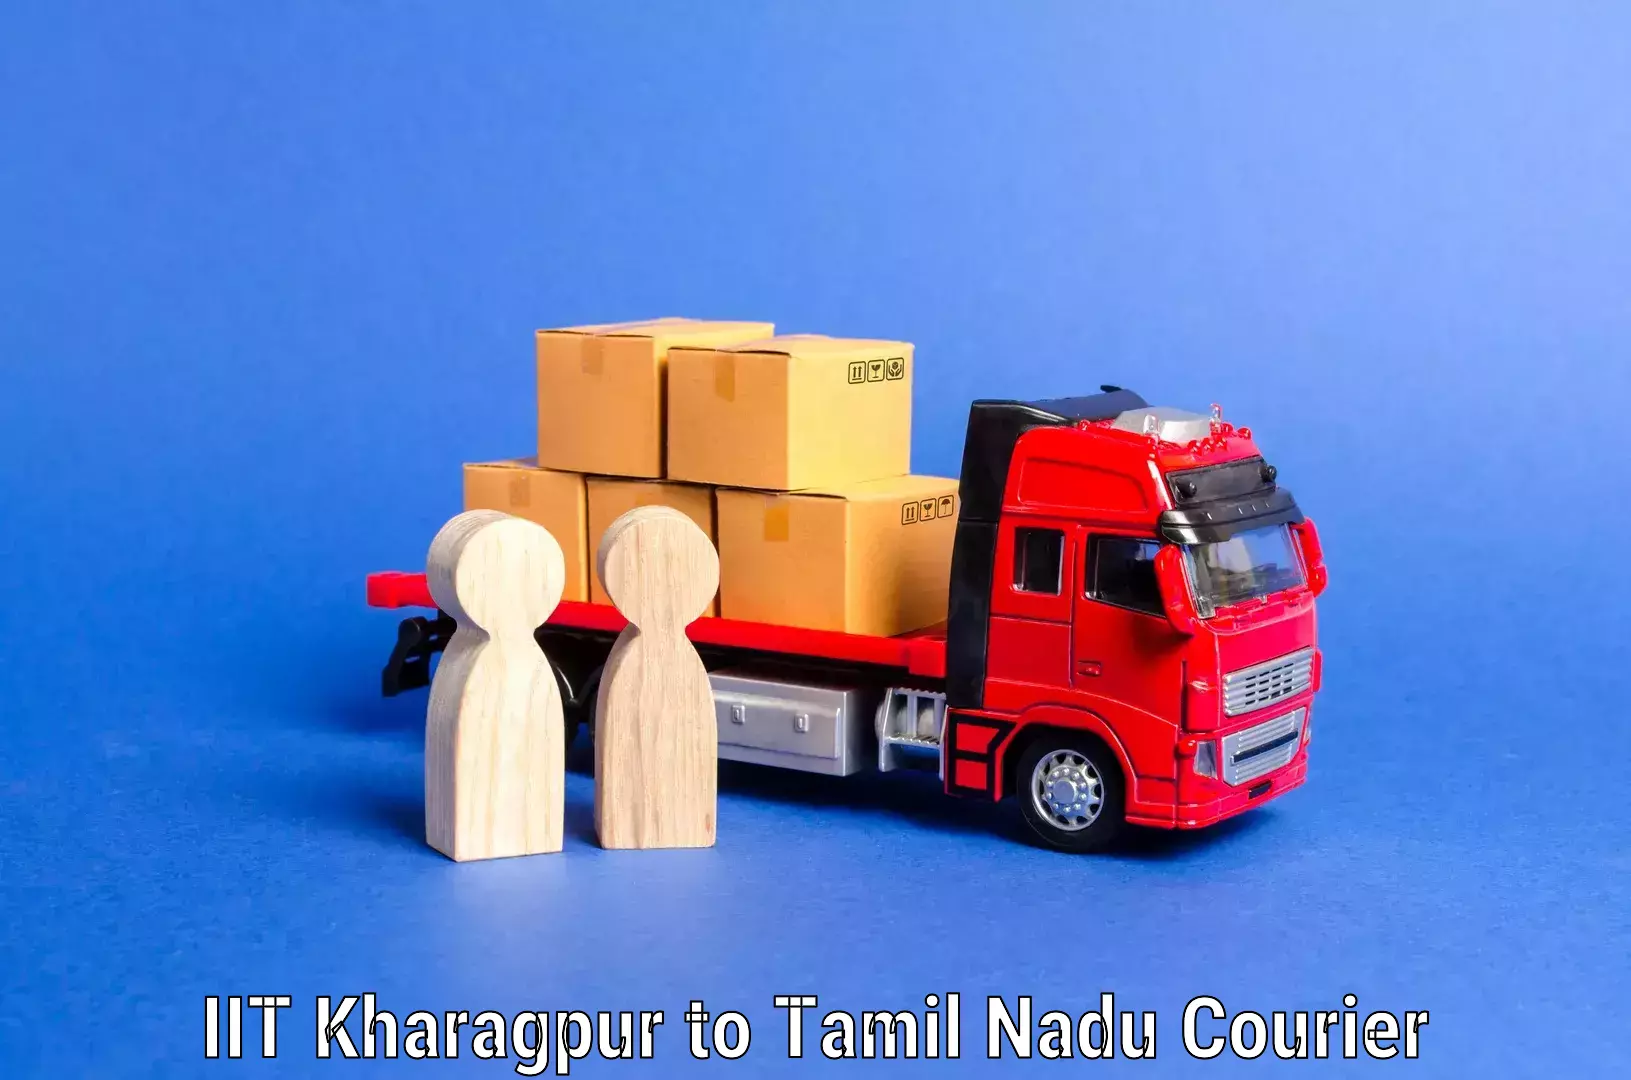 Home moving specialists IIT Kharagpur to Tamil Nadu